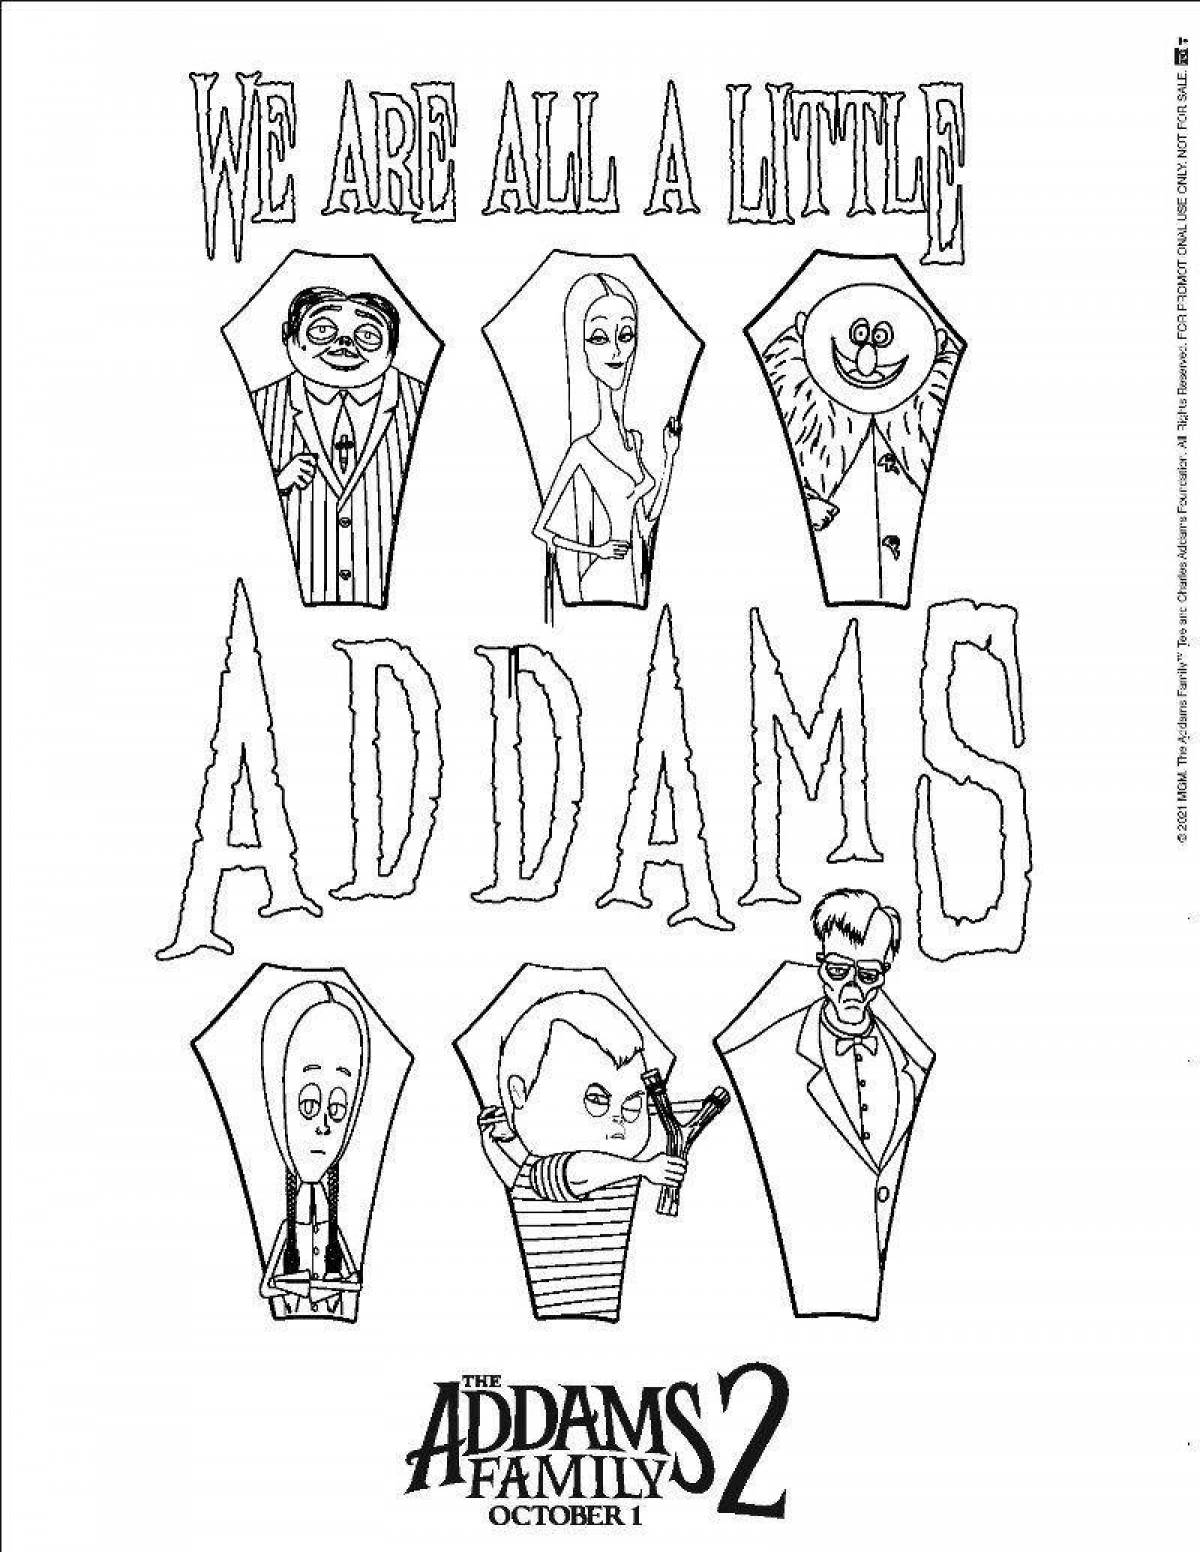 Addams family coloring book for kids